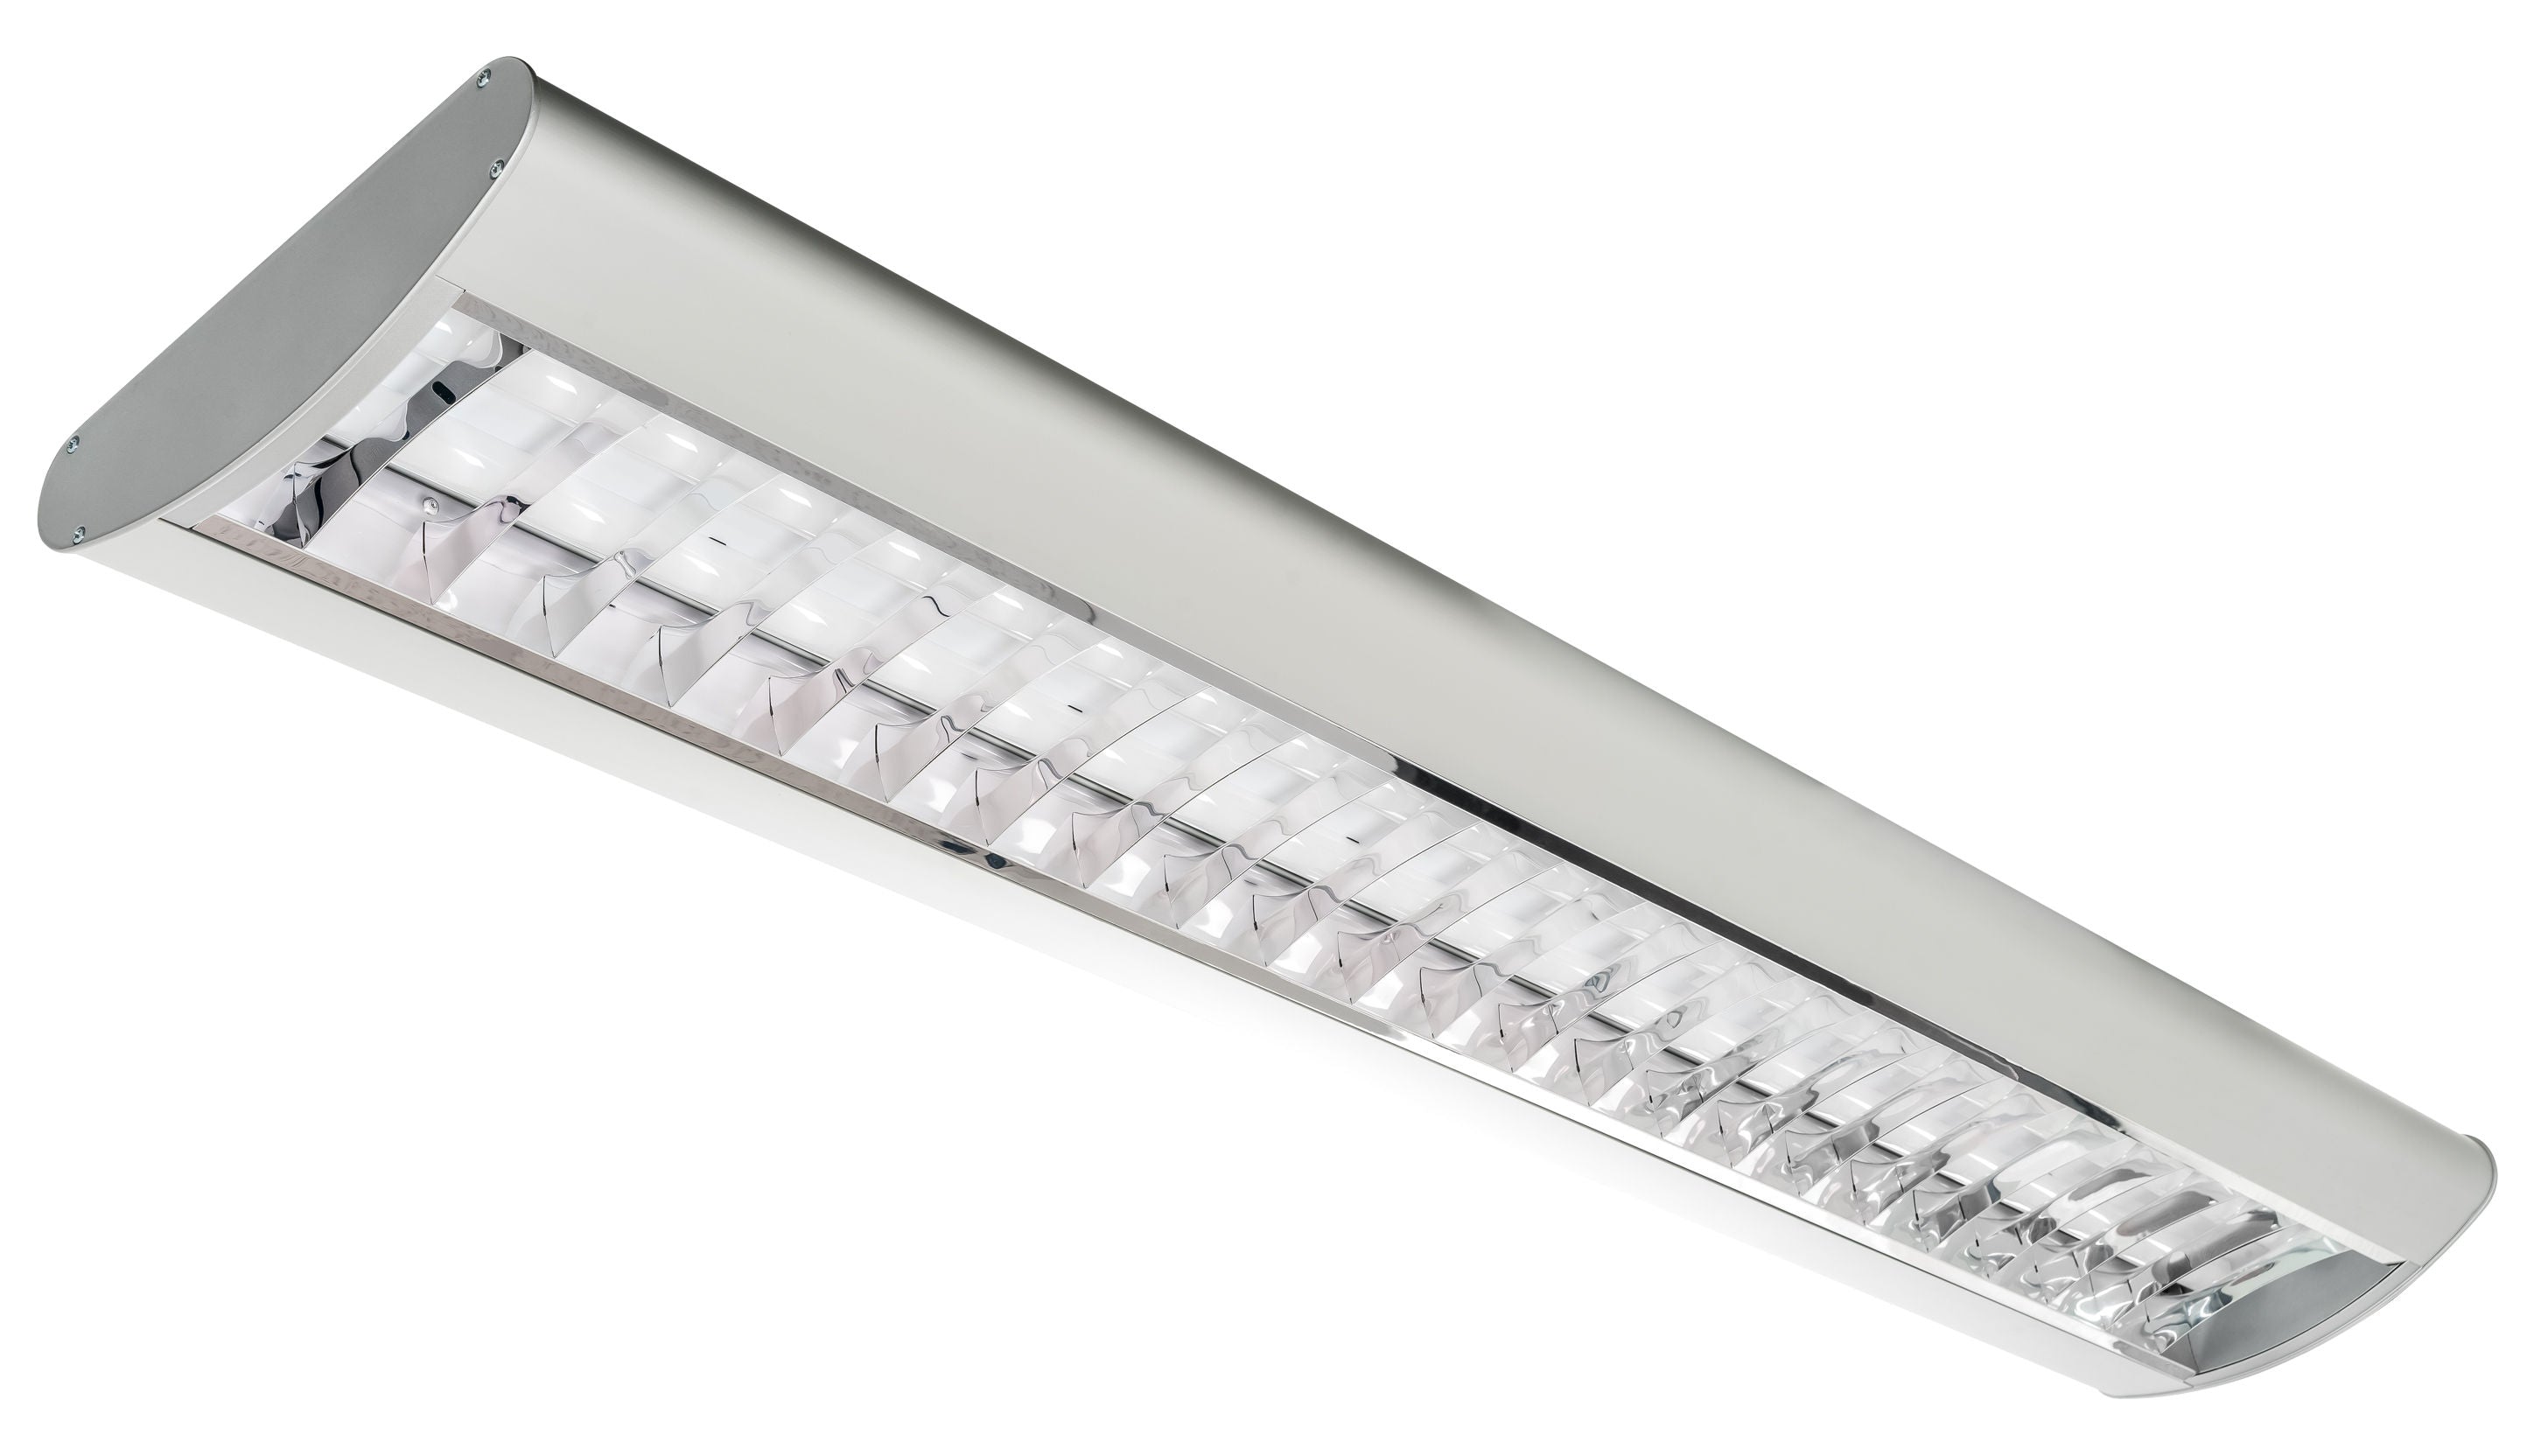 Westgate SCLP-4FT-40W-MCT-D LED Architectural Parabolic Suspended Down Light - White